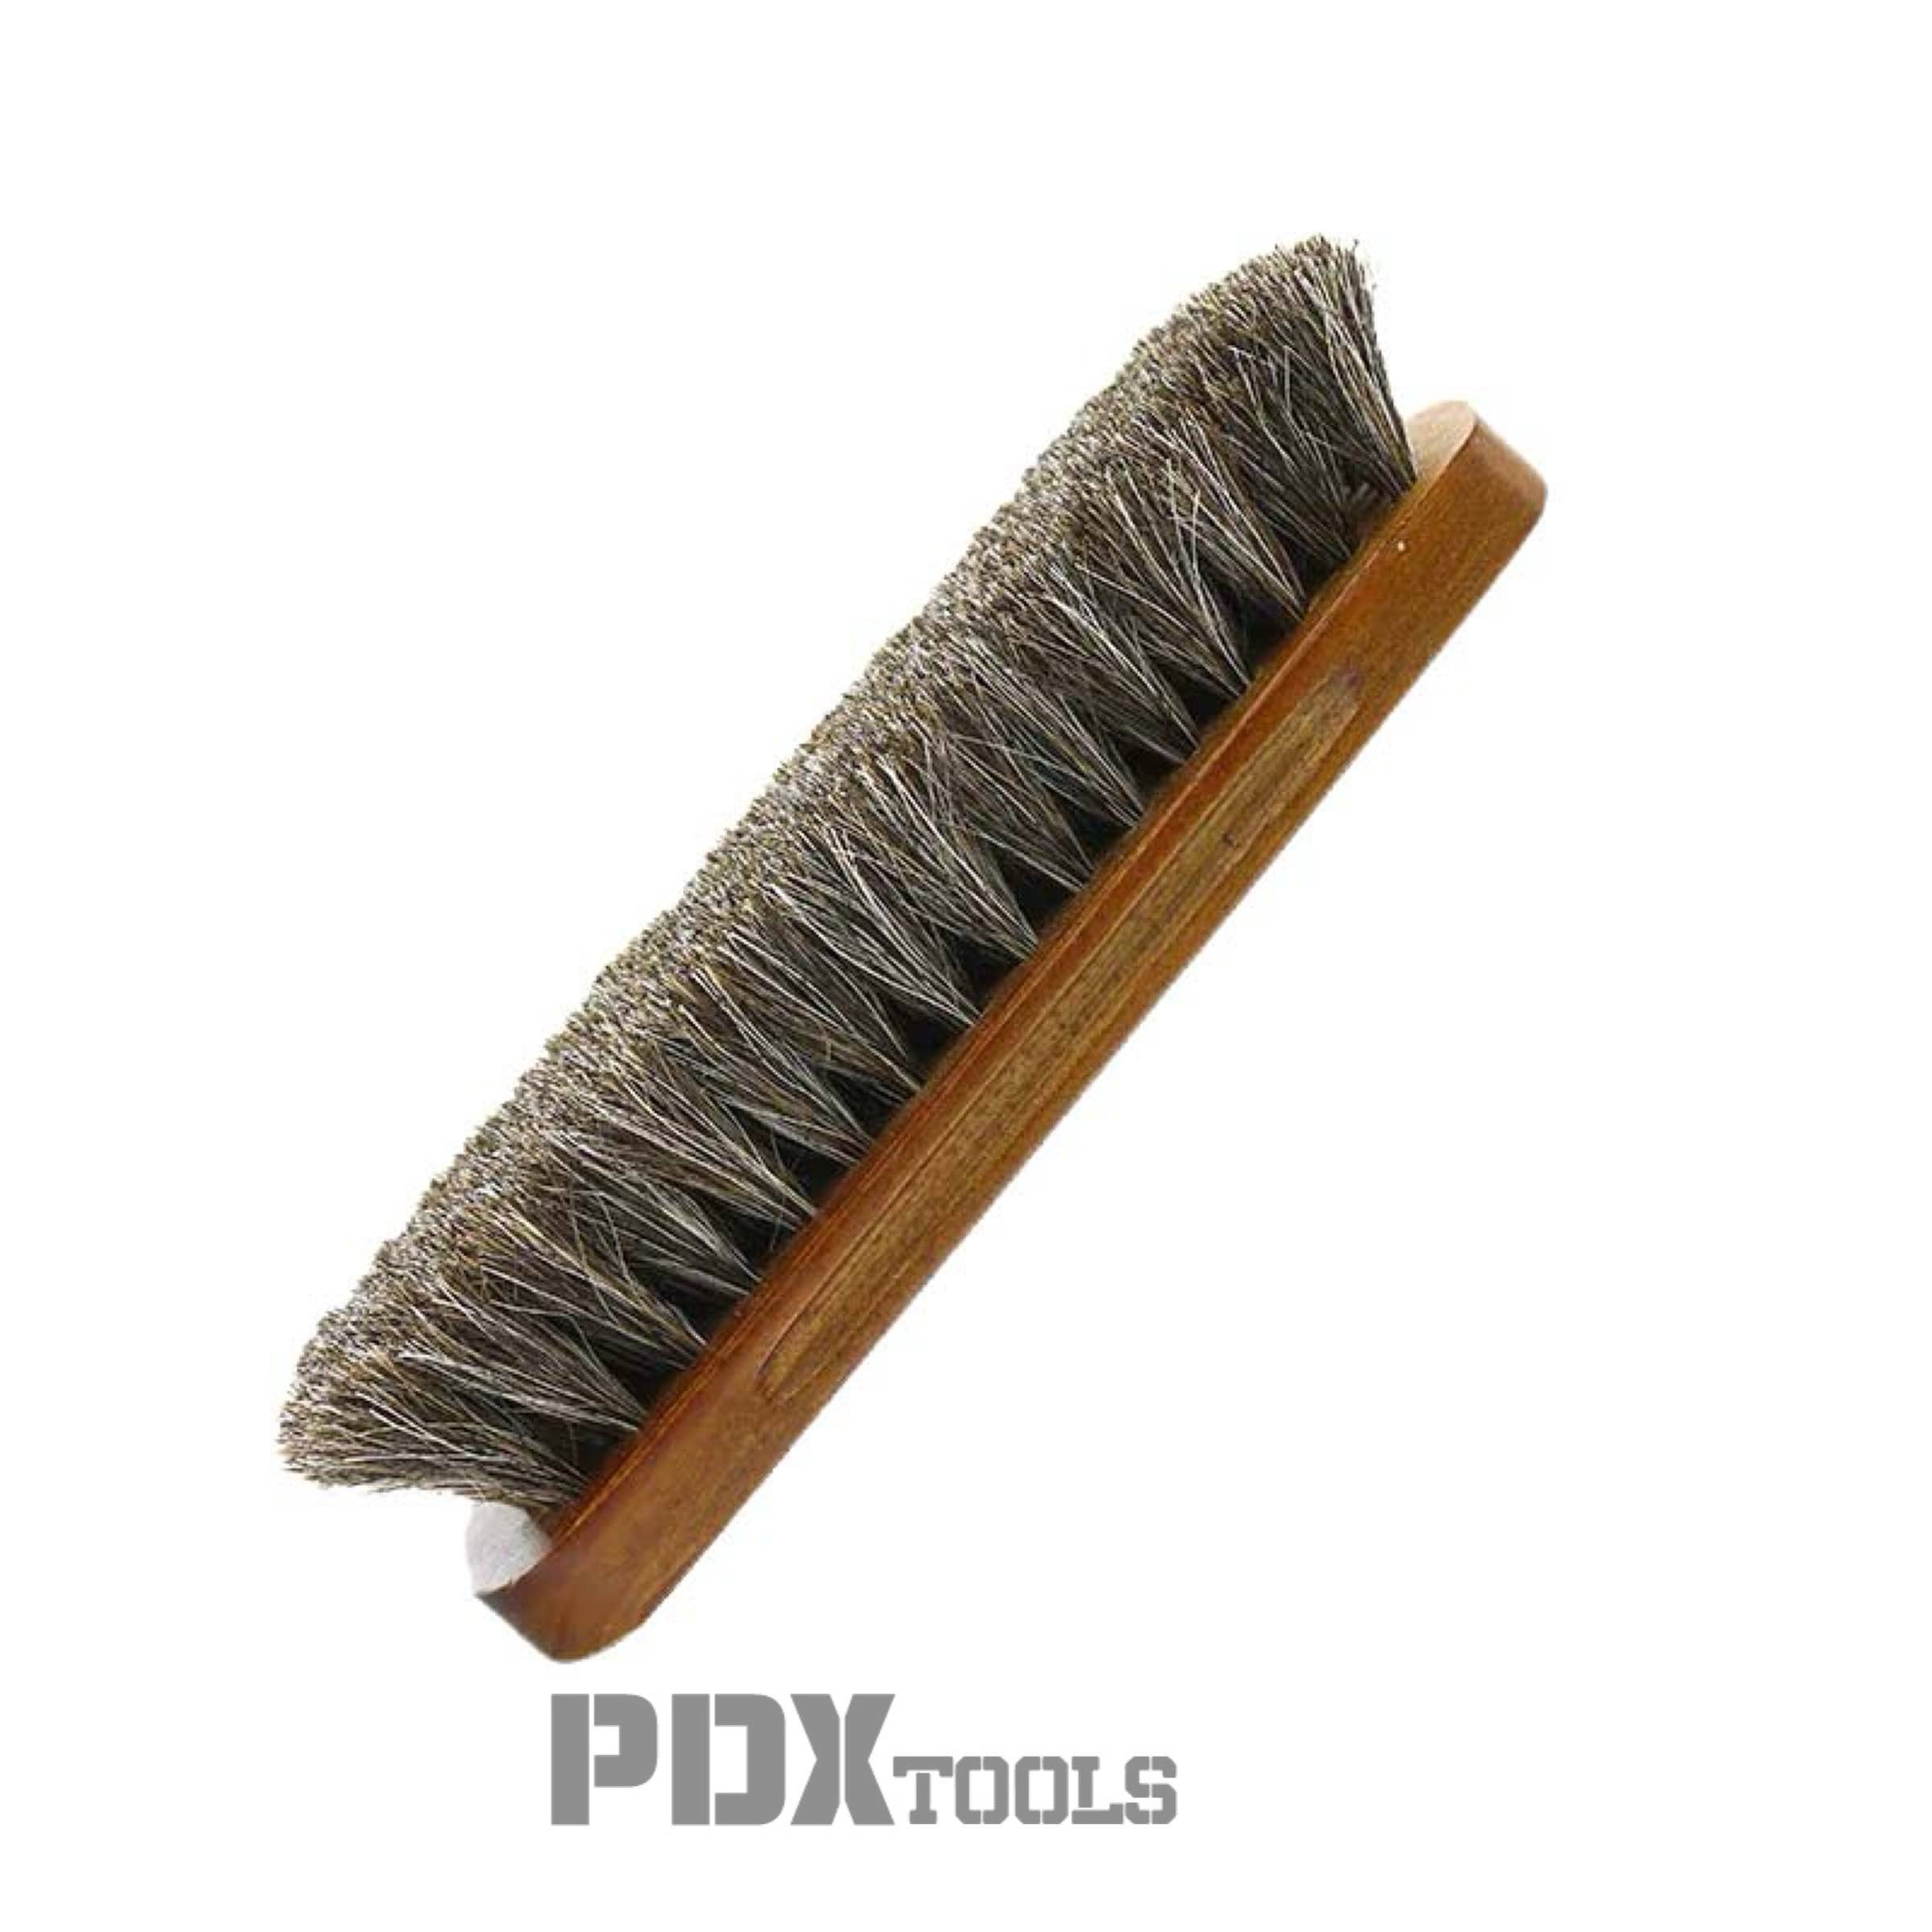 Leather and Alcantara Cleaning Brush - Compact Size - PDXtools